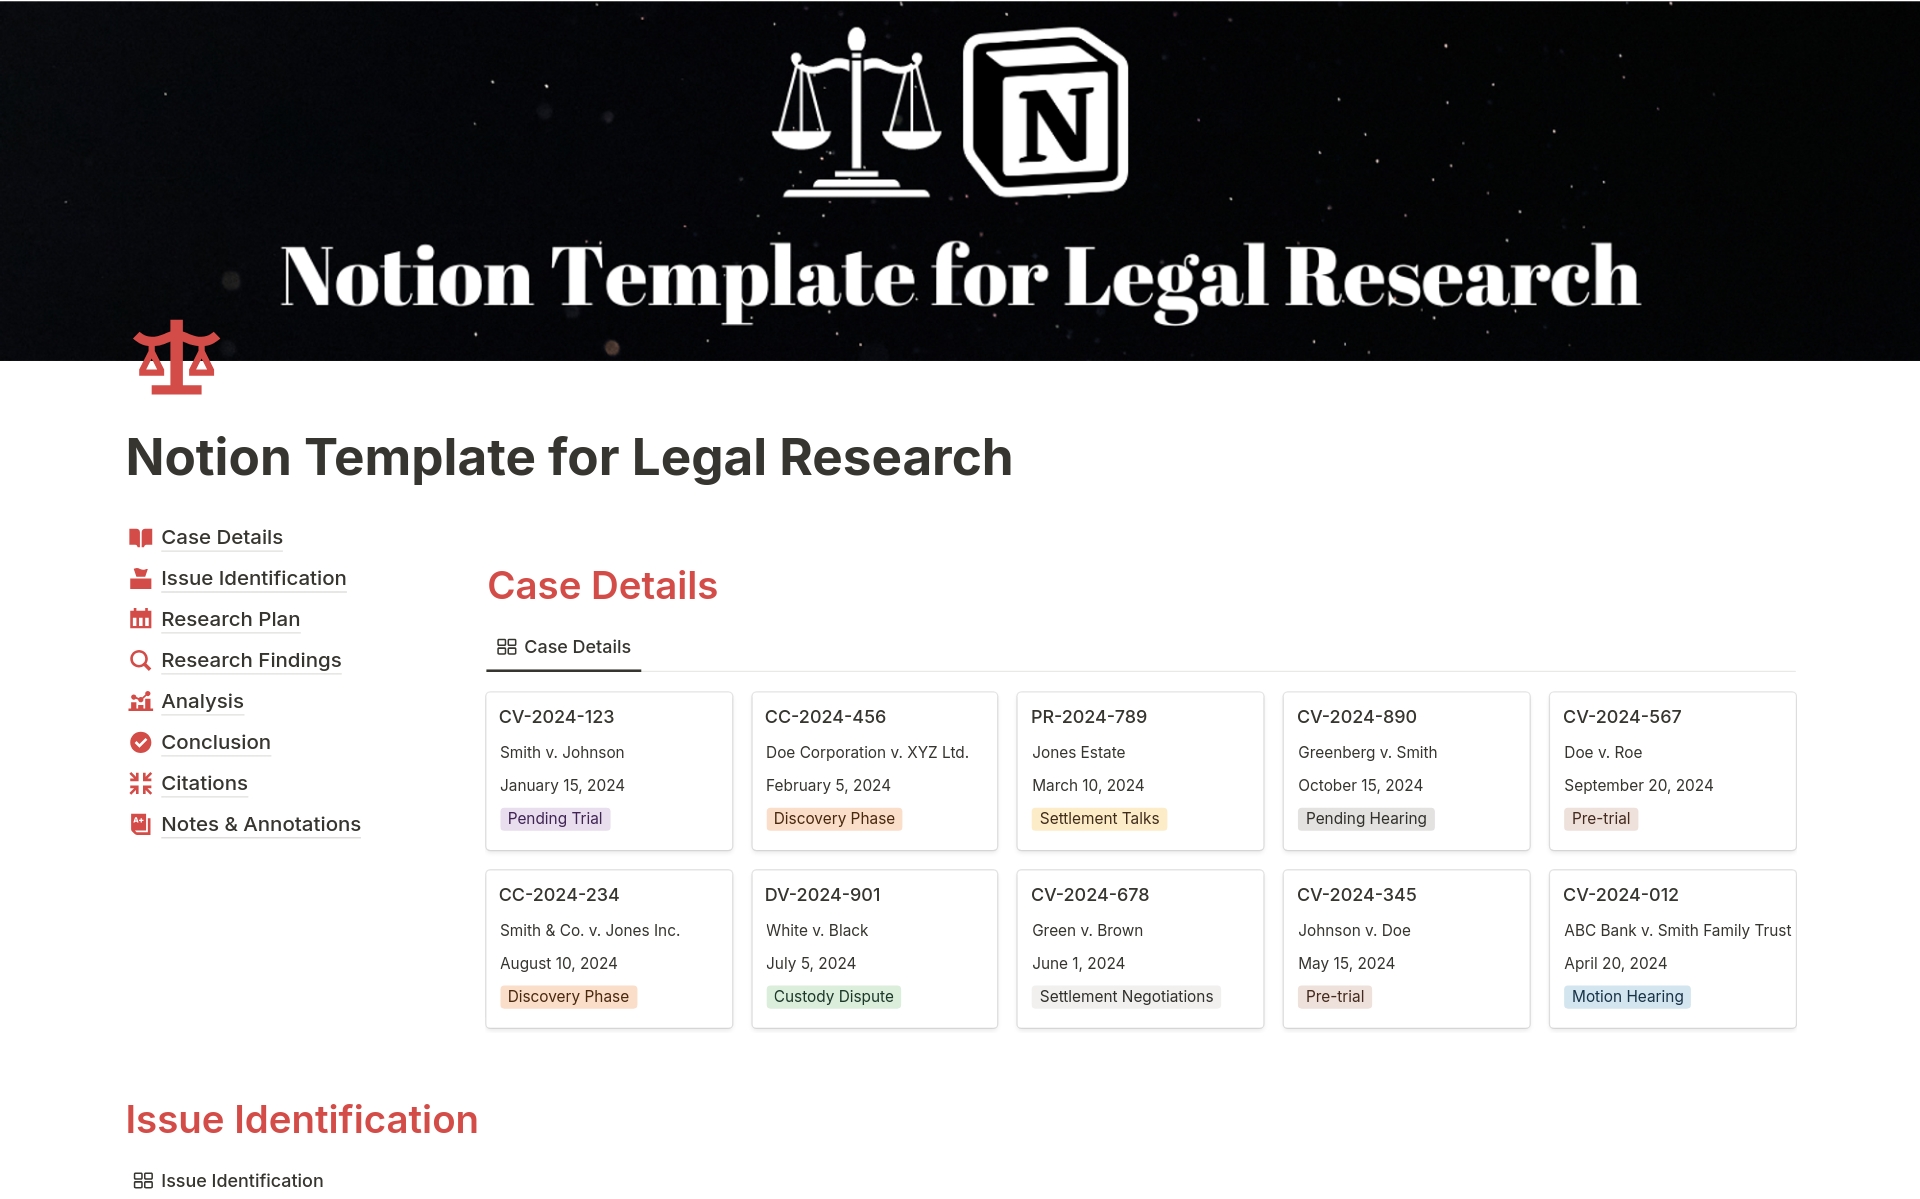 Unlock efficient legal research with our Notion Template tailored for legal professionals. Seamlessly organize case law, statutes, and annotations in one centralized platform. Elevate your research workflow and streamline case analysis with ease.